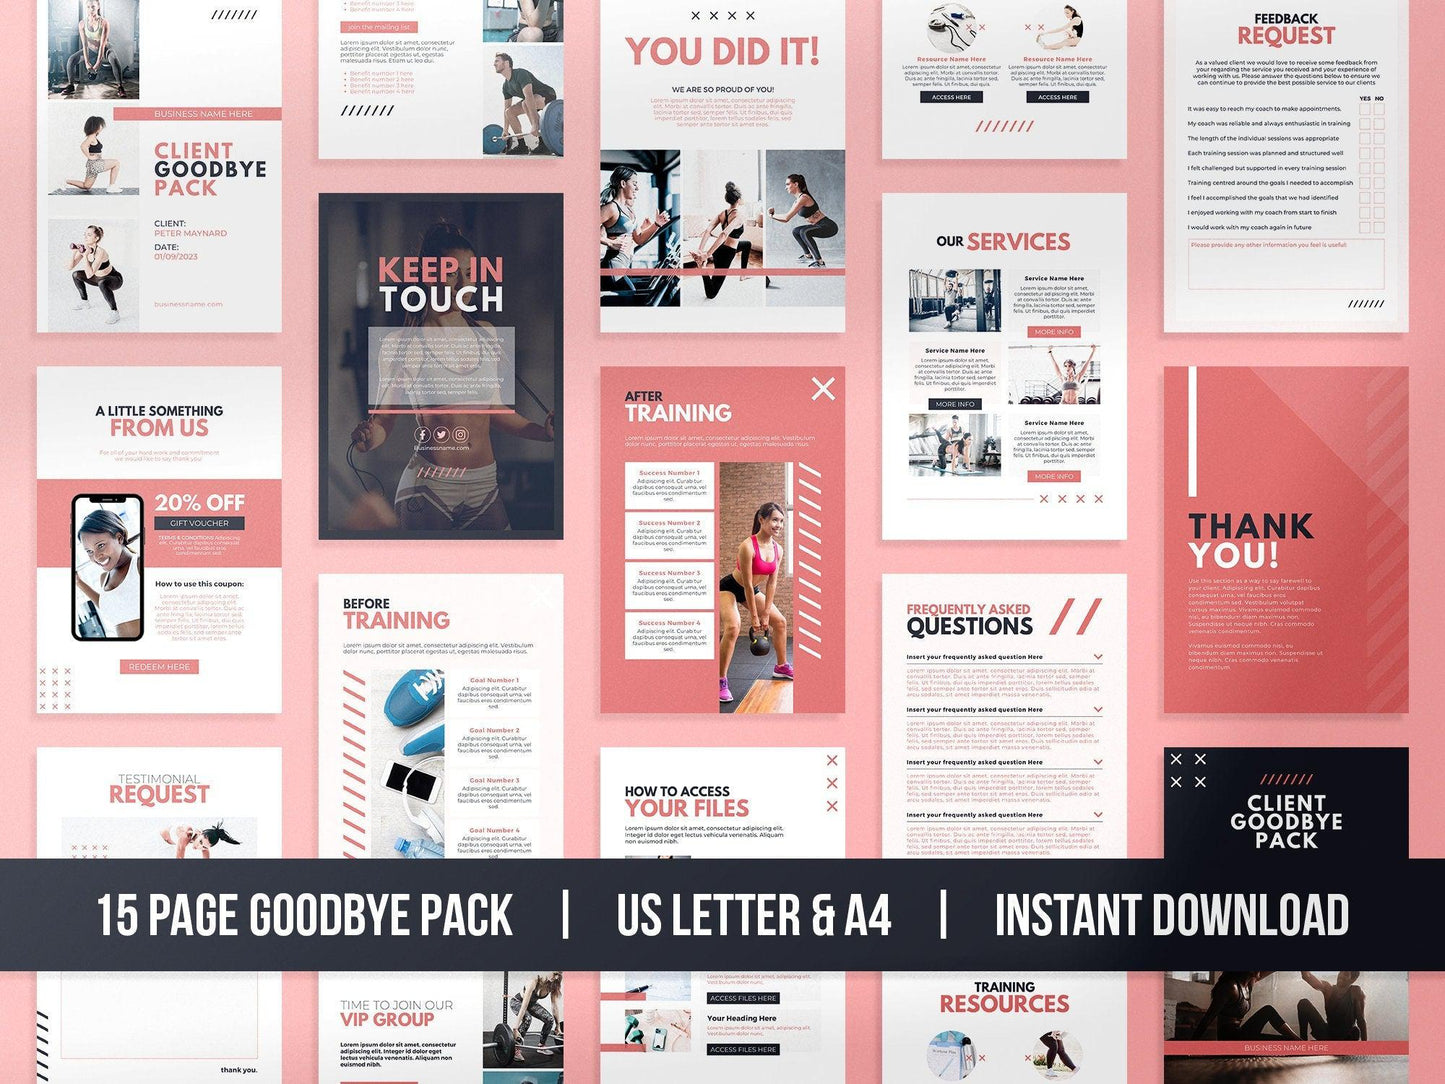 Fitness Client Welcome Pack and Client Goodbye Pack (blush)